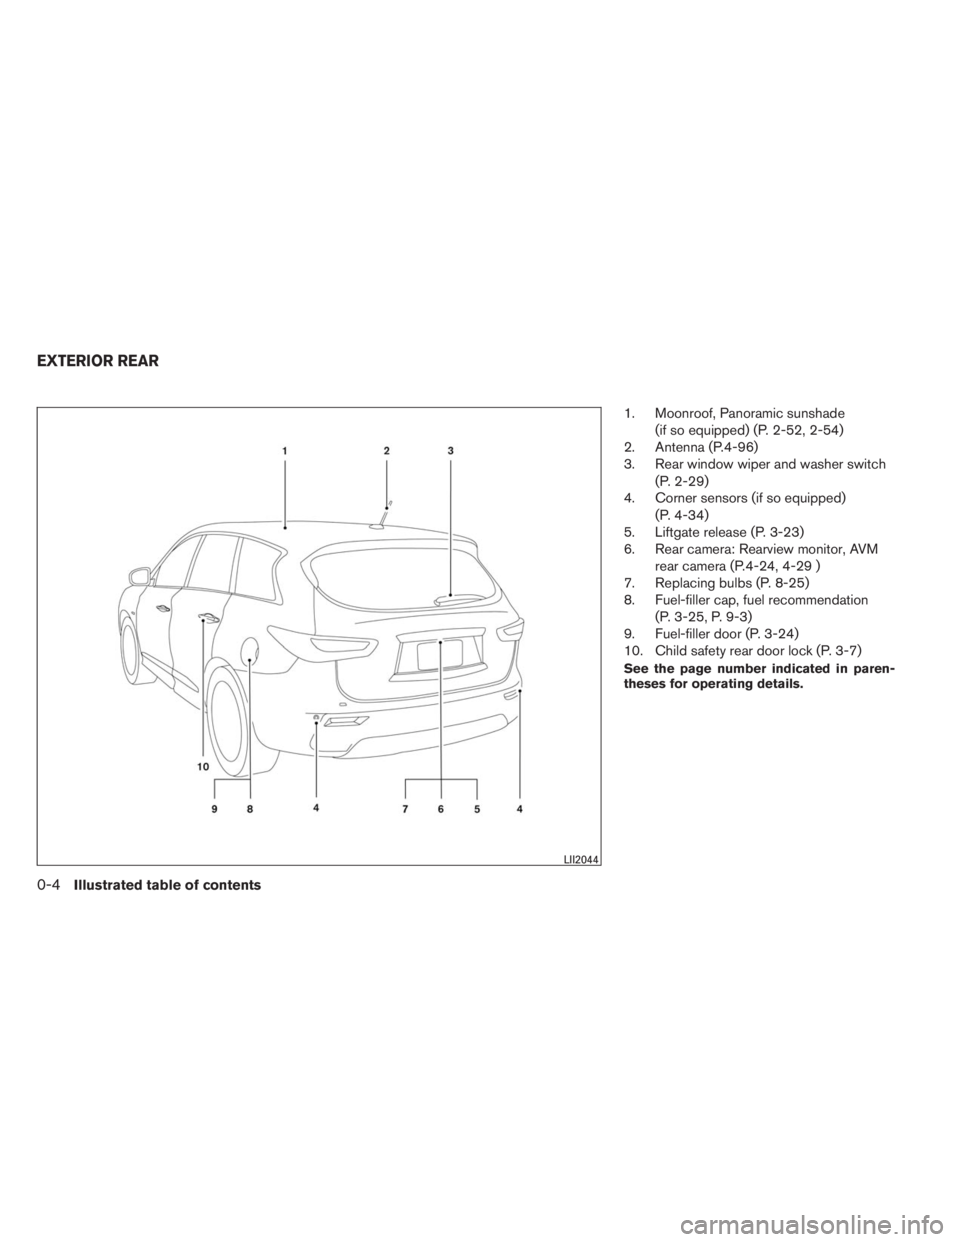 INFINITI QX60 HYBRID 2014  Owners Manual 1. Moonroof, Panoramic sunshade
(if so equipped) (P. 2-52, 2-54)
2. Antenna (P.4-96)
3. Rear window wiper and washer switch
(P. 2-29)
4. Corner sensors (if so equipped)
(P. 4-34)
5. Liftgate release (